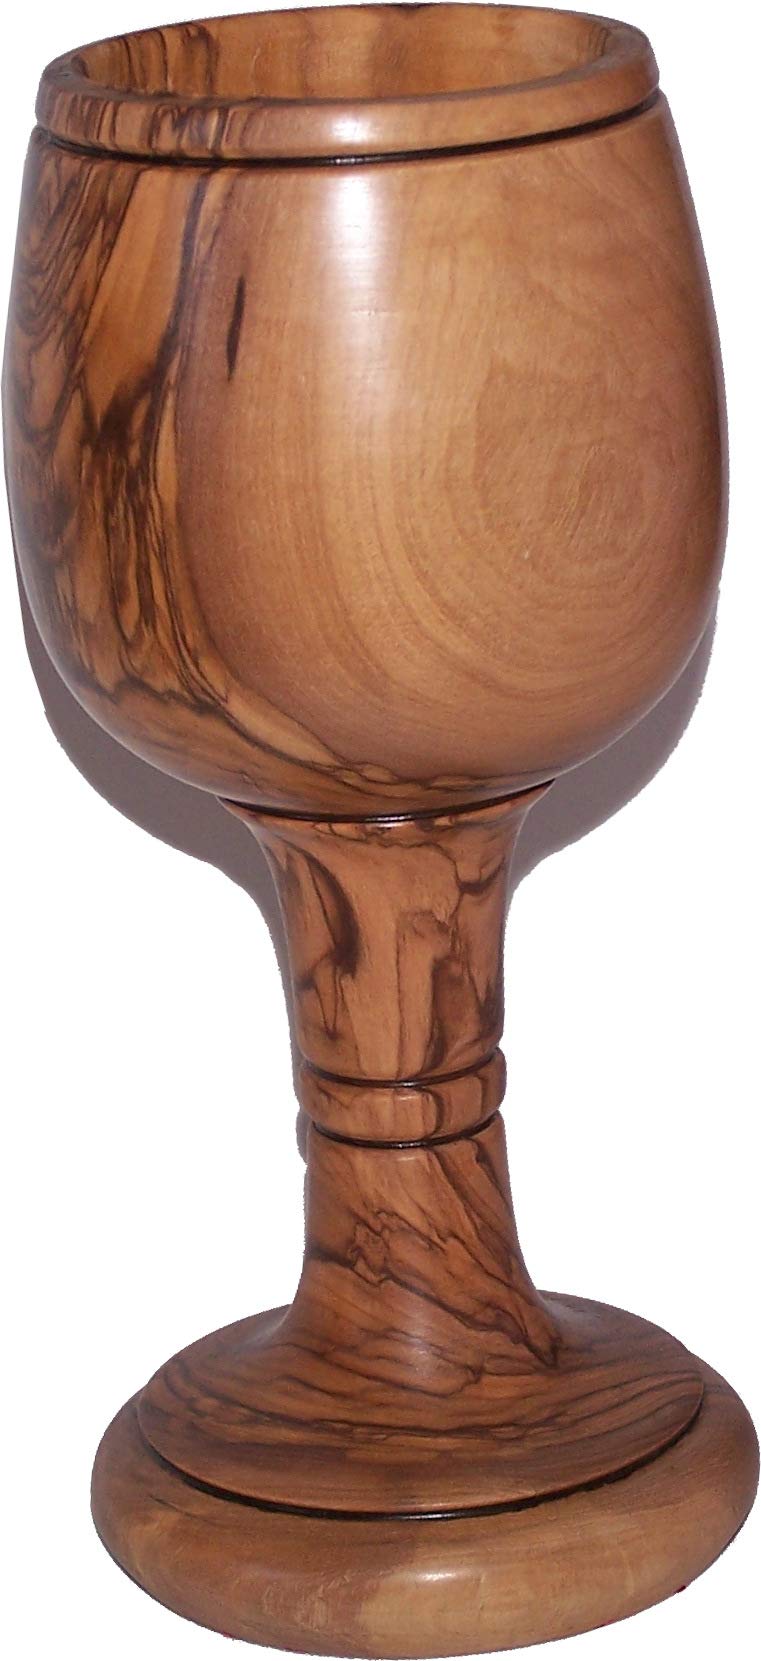 Holy Land Market Goblet - Chalice - Dark Olive Wood (8 Inches Large) - Cup (5.5 Ounces Capacity)